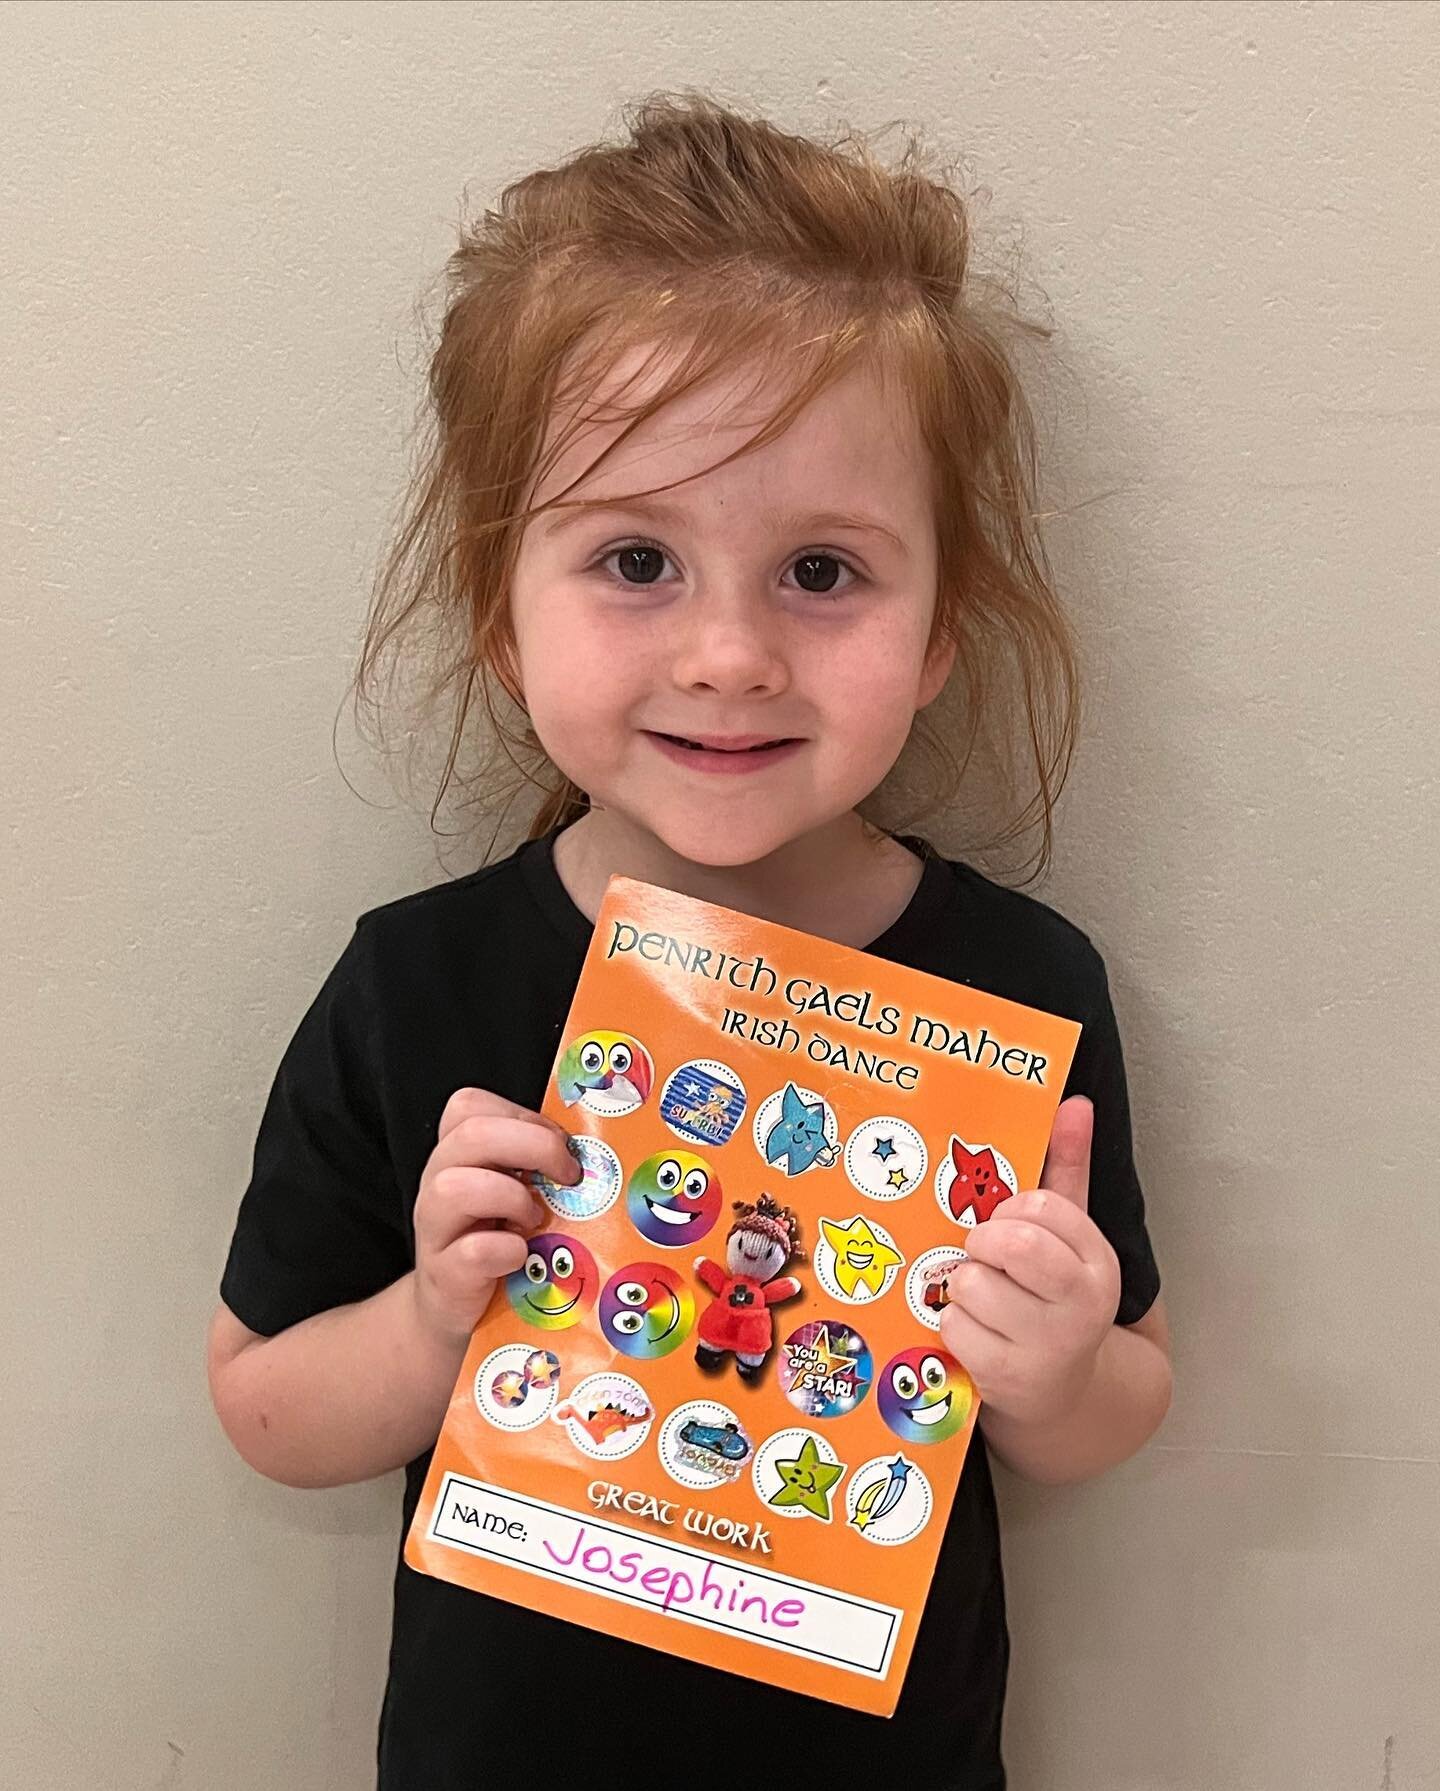 ✨Taking a moment ahead of the March madness to celebrate some of our little stars! Josephine and Ryan recently completed their sticker charts, and Sophia celebrated her birthday! (So did Alannah, but she didn&rsquo;t want to make a big deal out of it